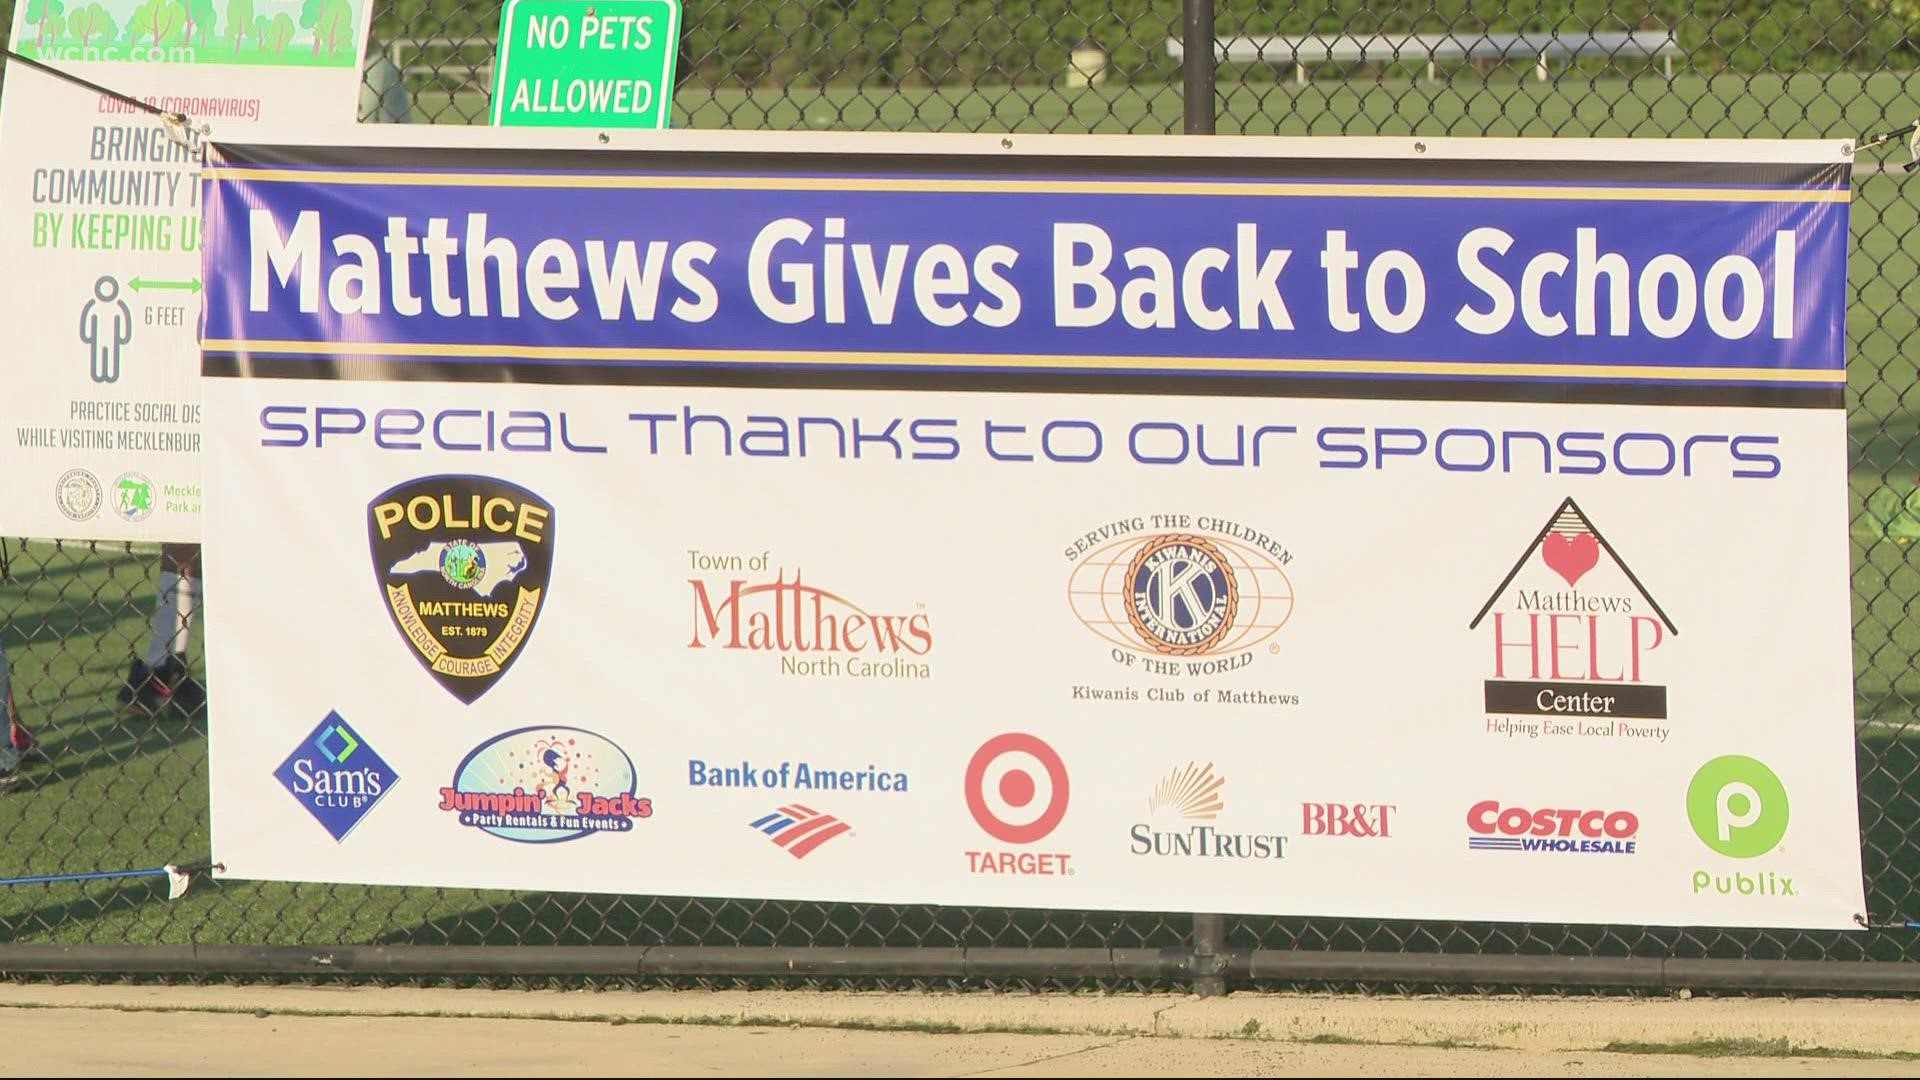 Police officers and firefighters helped make sure kids in Matthews have the necessities for back-to-school success.